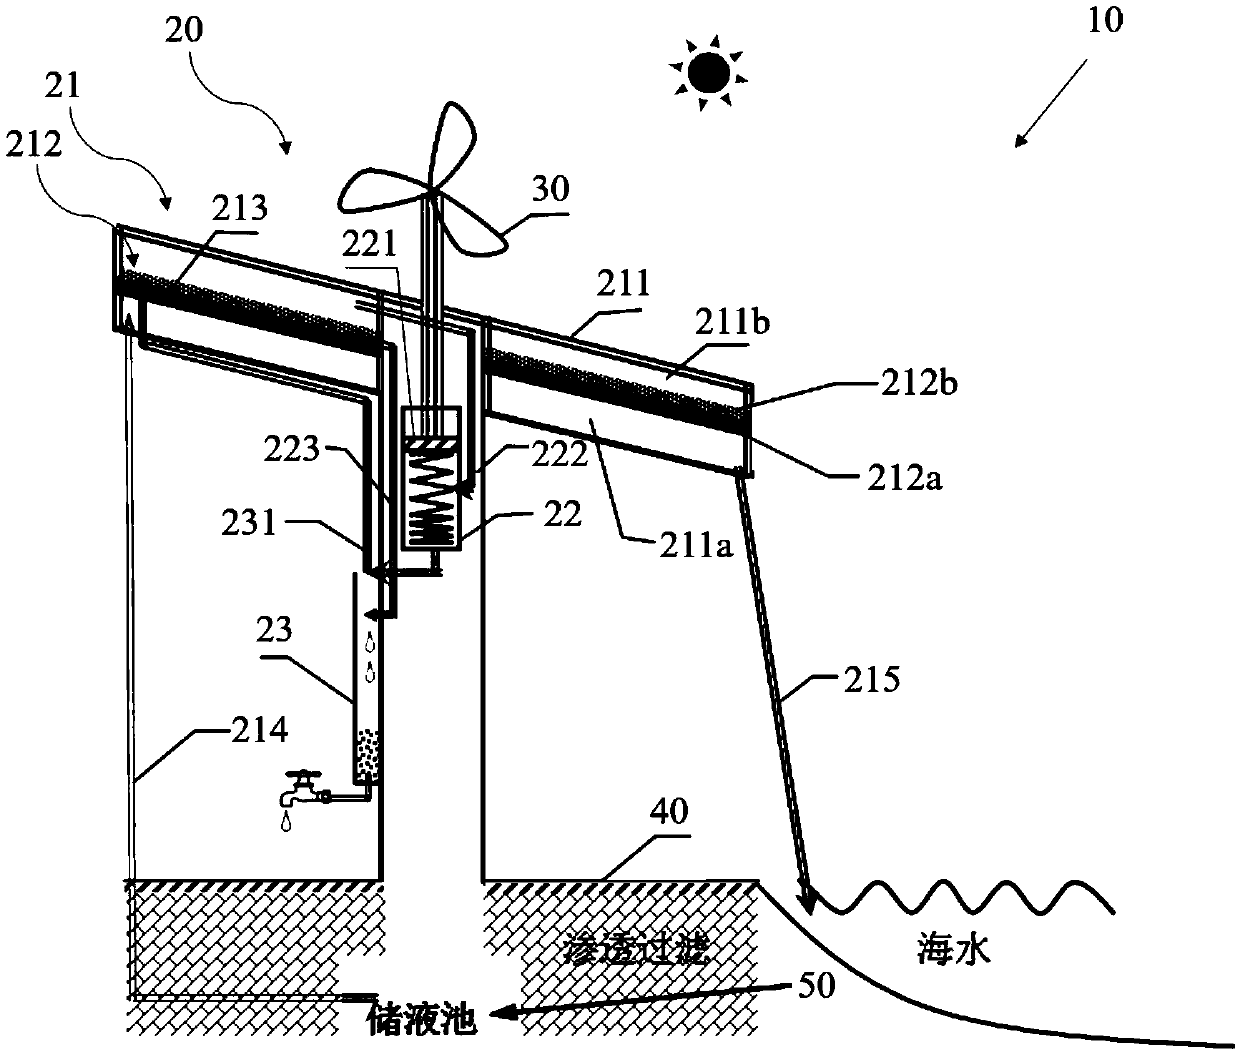 Seawater desalination device and system with wind-solar complementary coupling